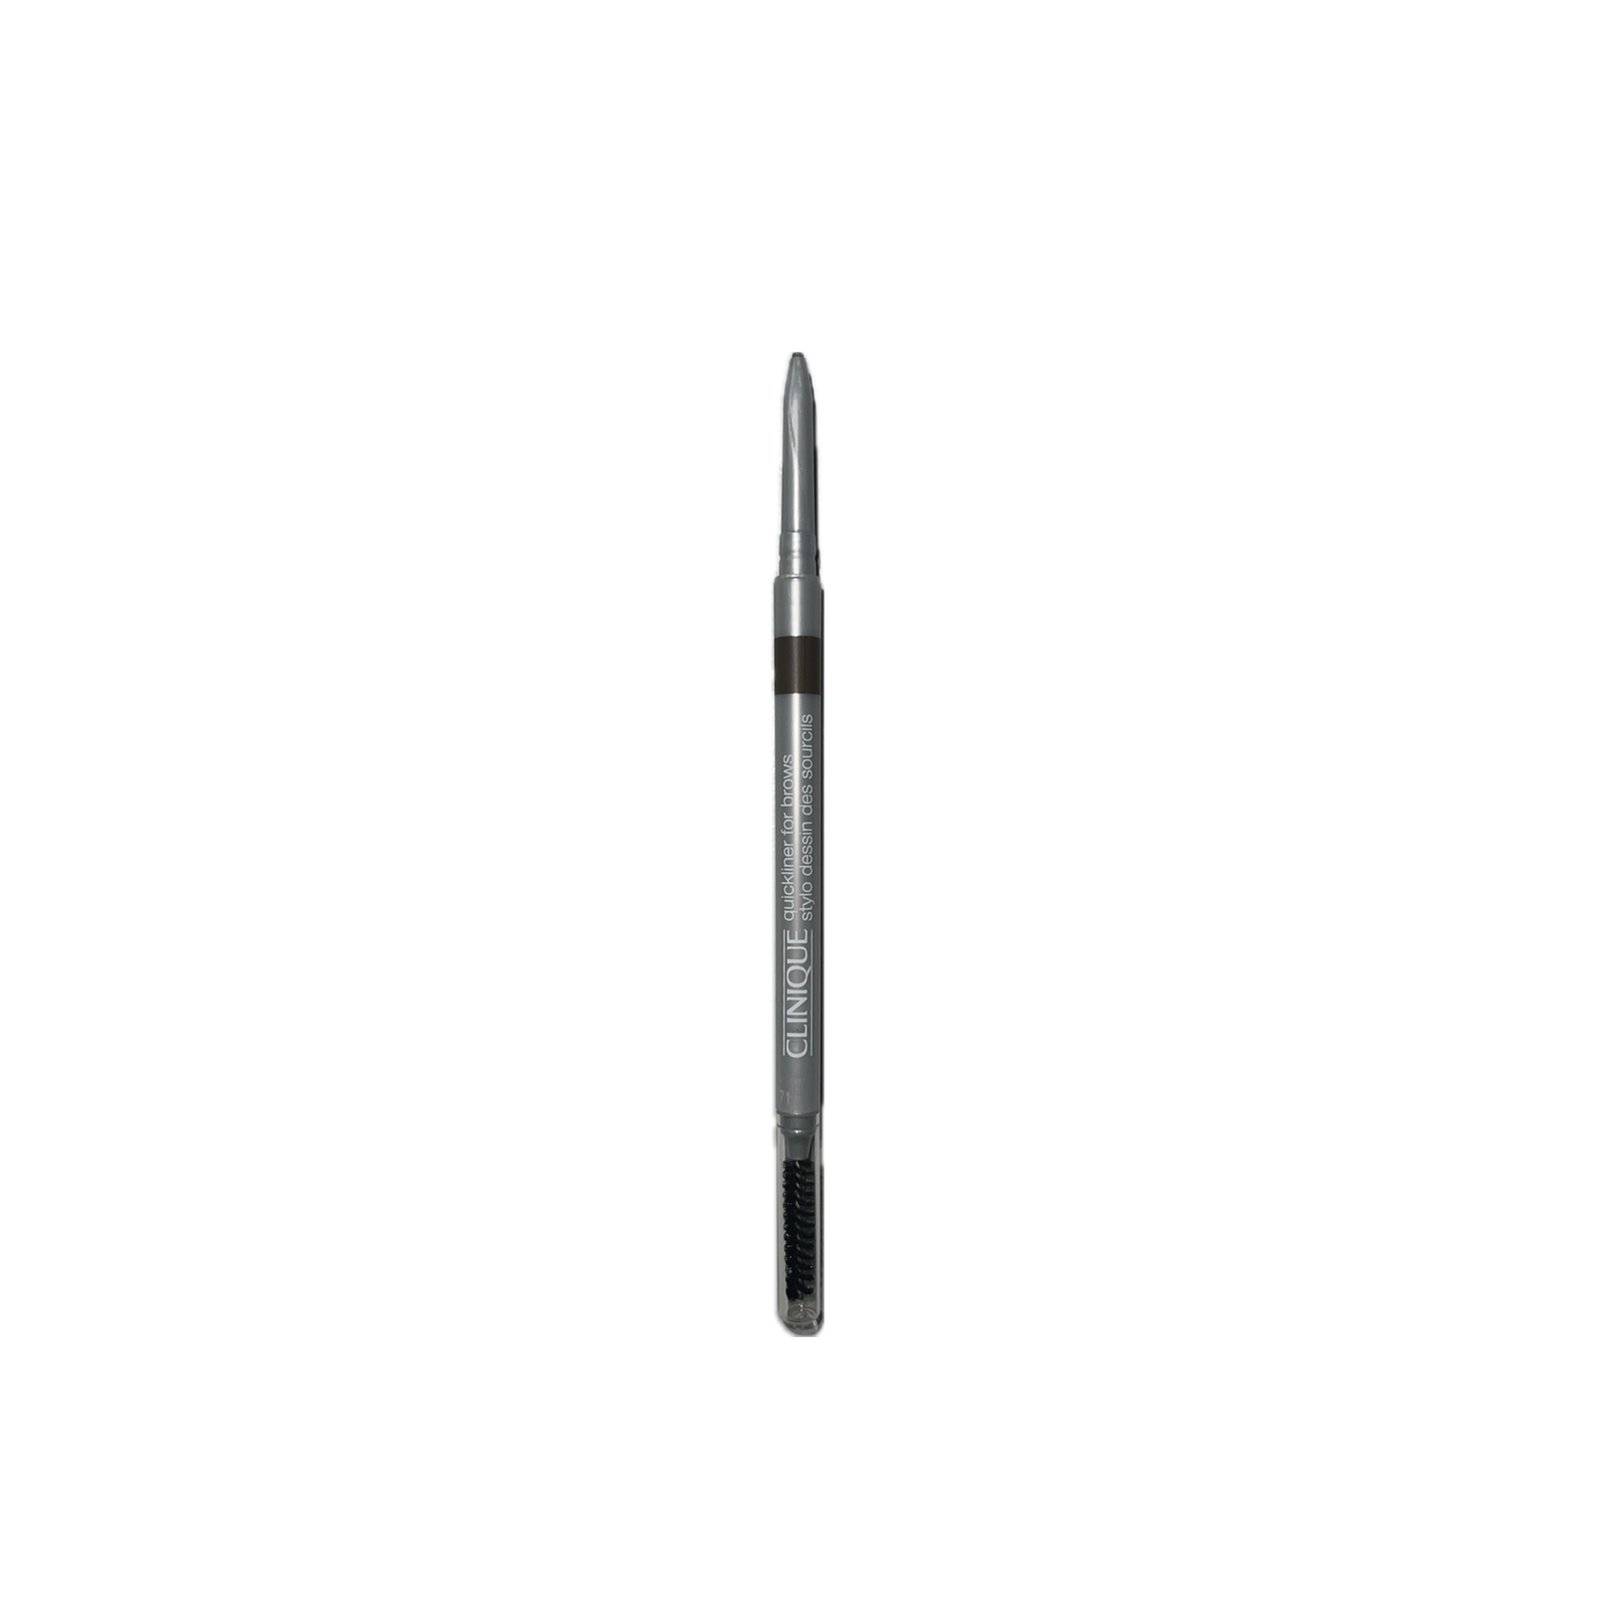 Clinique Quickliner For Brows Eyebrow Pencil 03 Soft Brown 0.06g (0.002 oz)